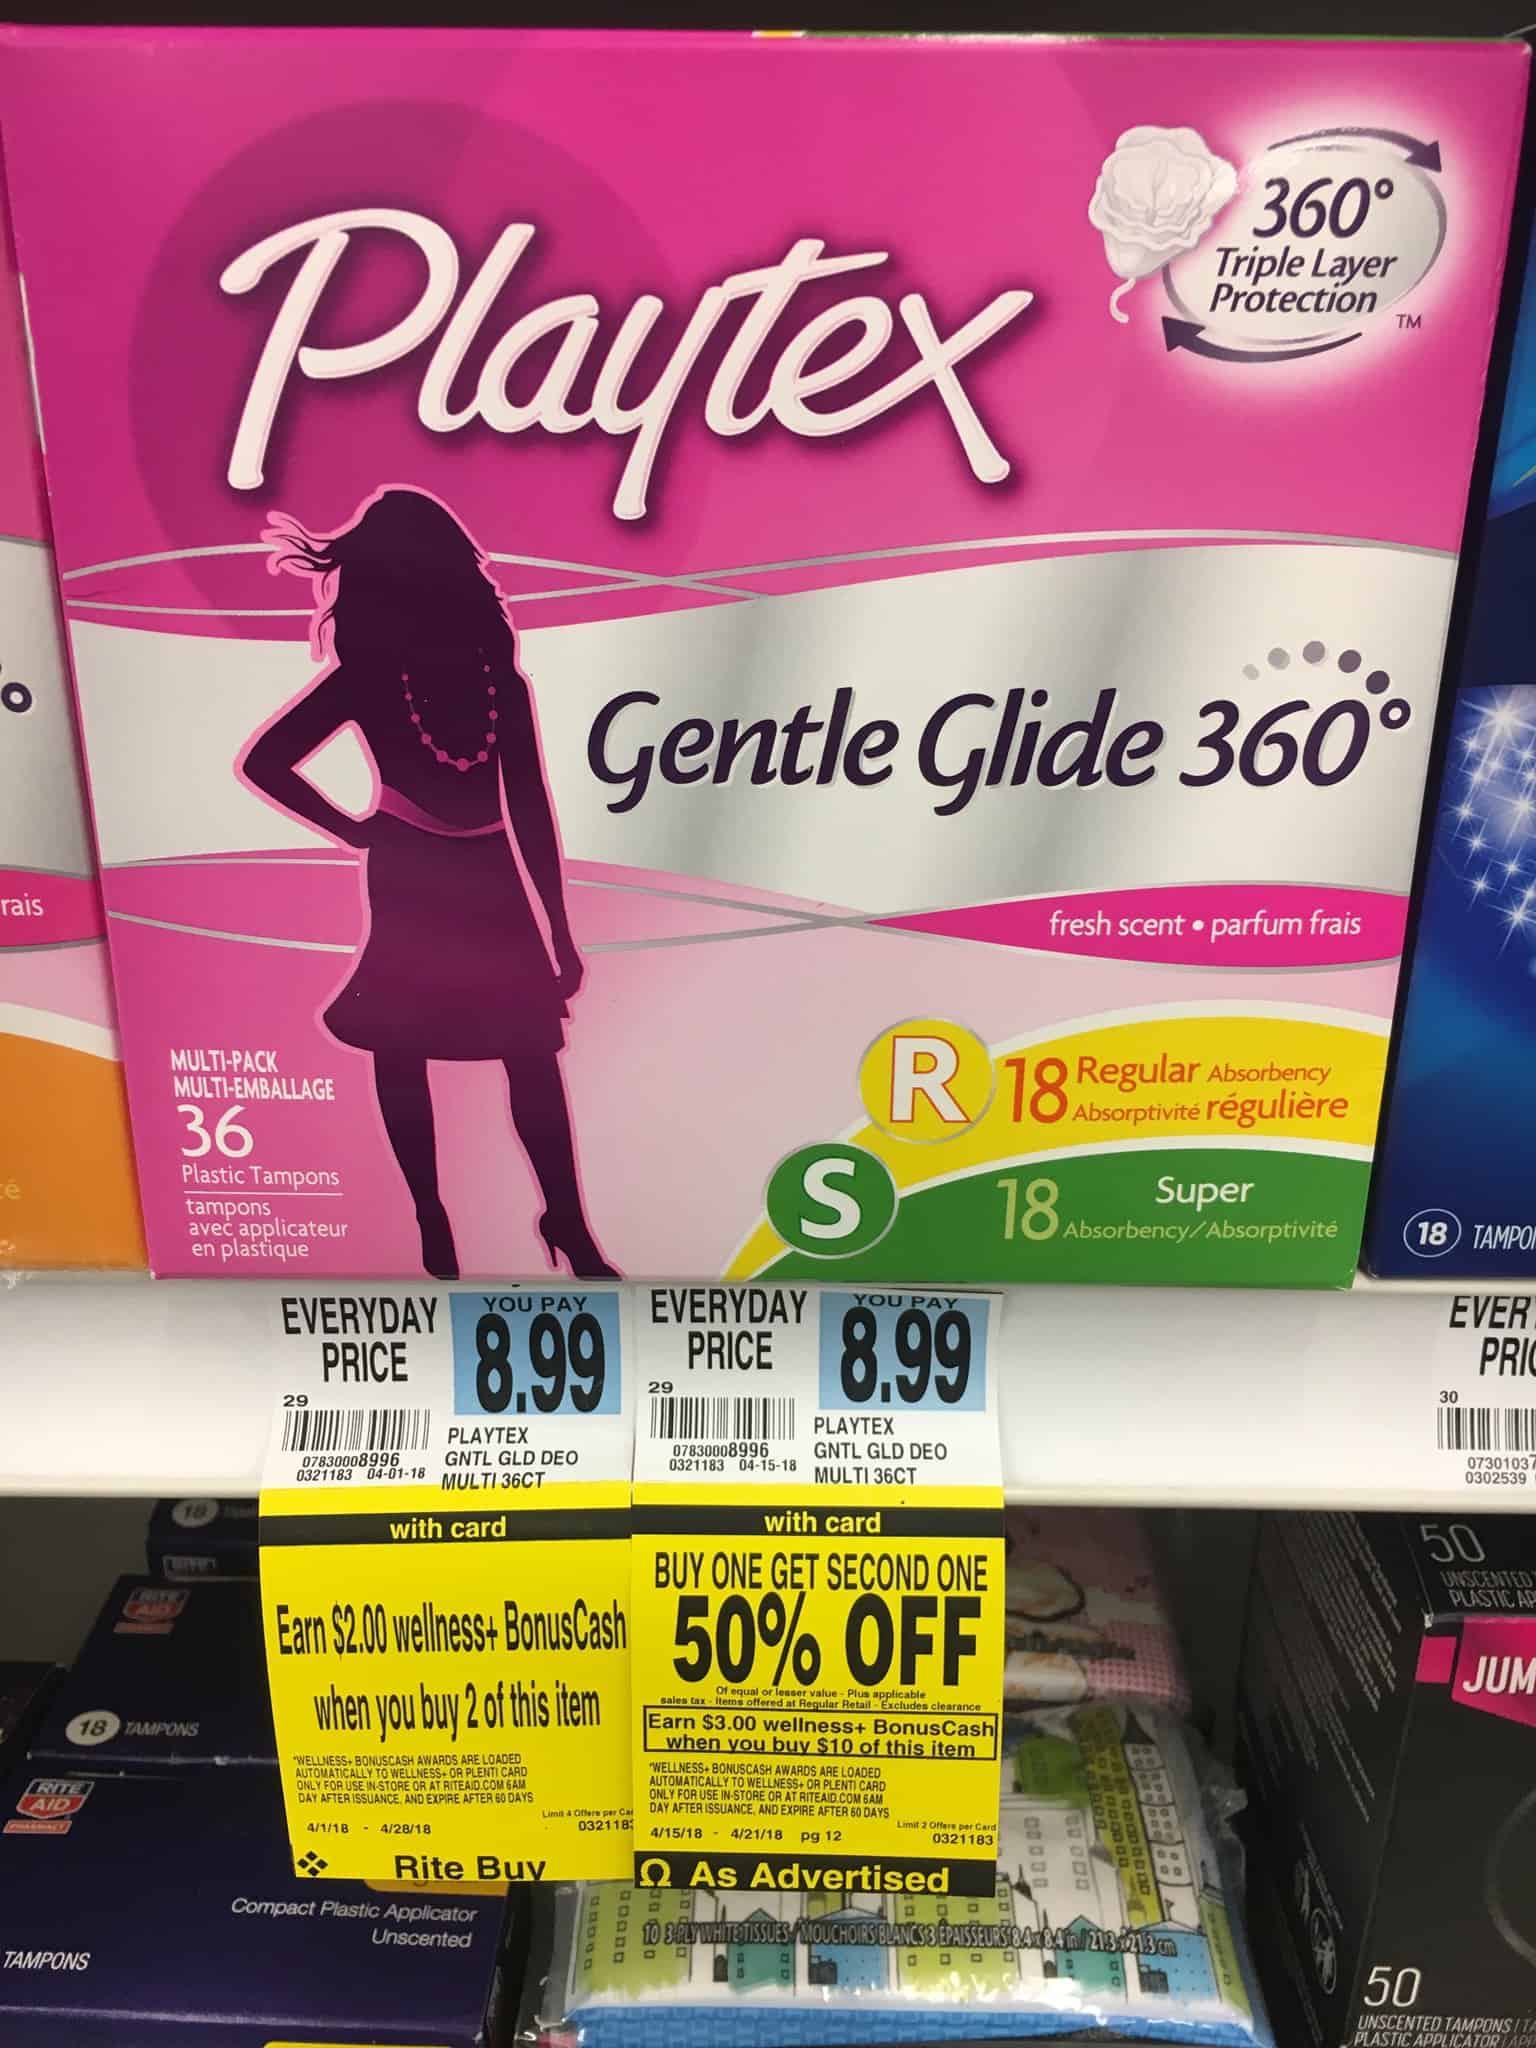 Rite Aid: Playtex Gentle Glide Tampons 36 Count ONLY $2.25 each through 4/21